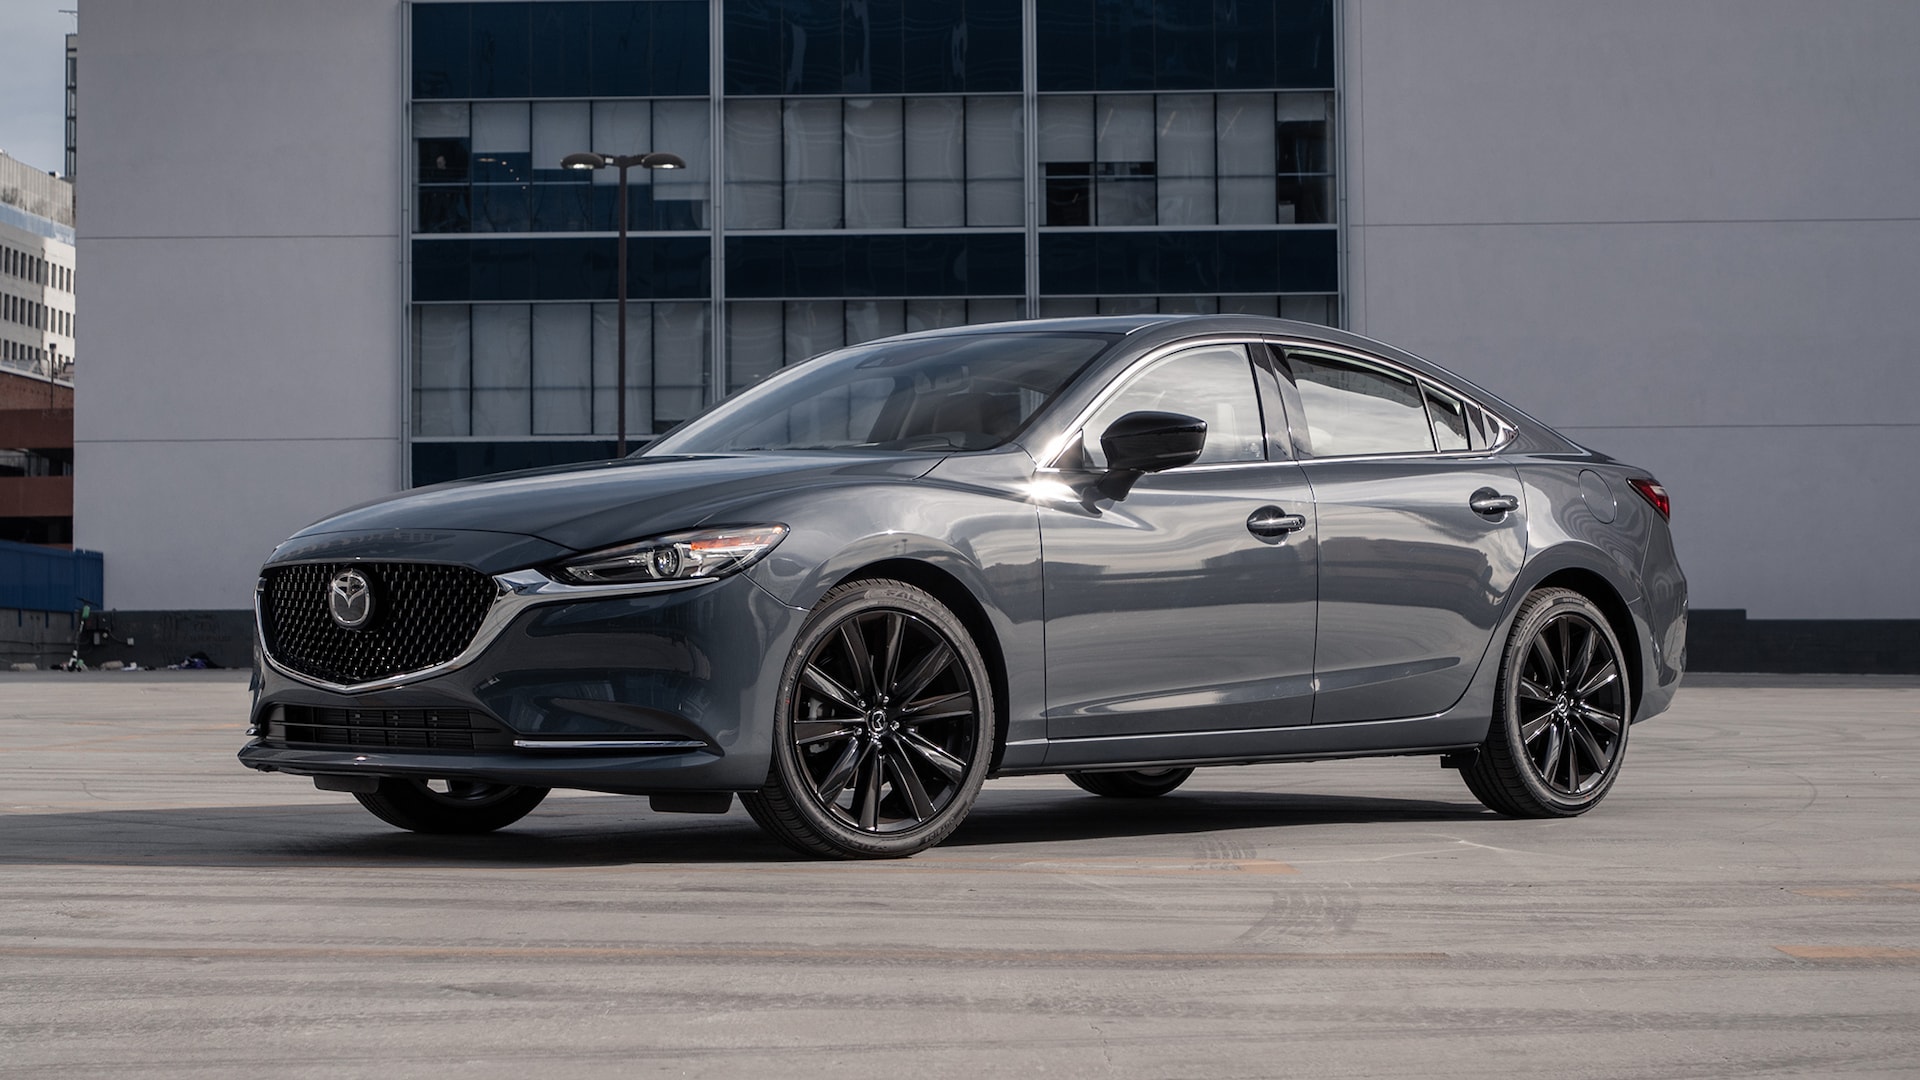 2021 Mazda 6 Carbon Edition First Test: Fun, But Getting Old